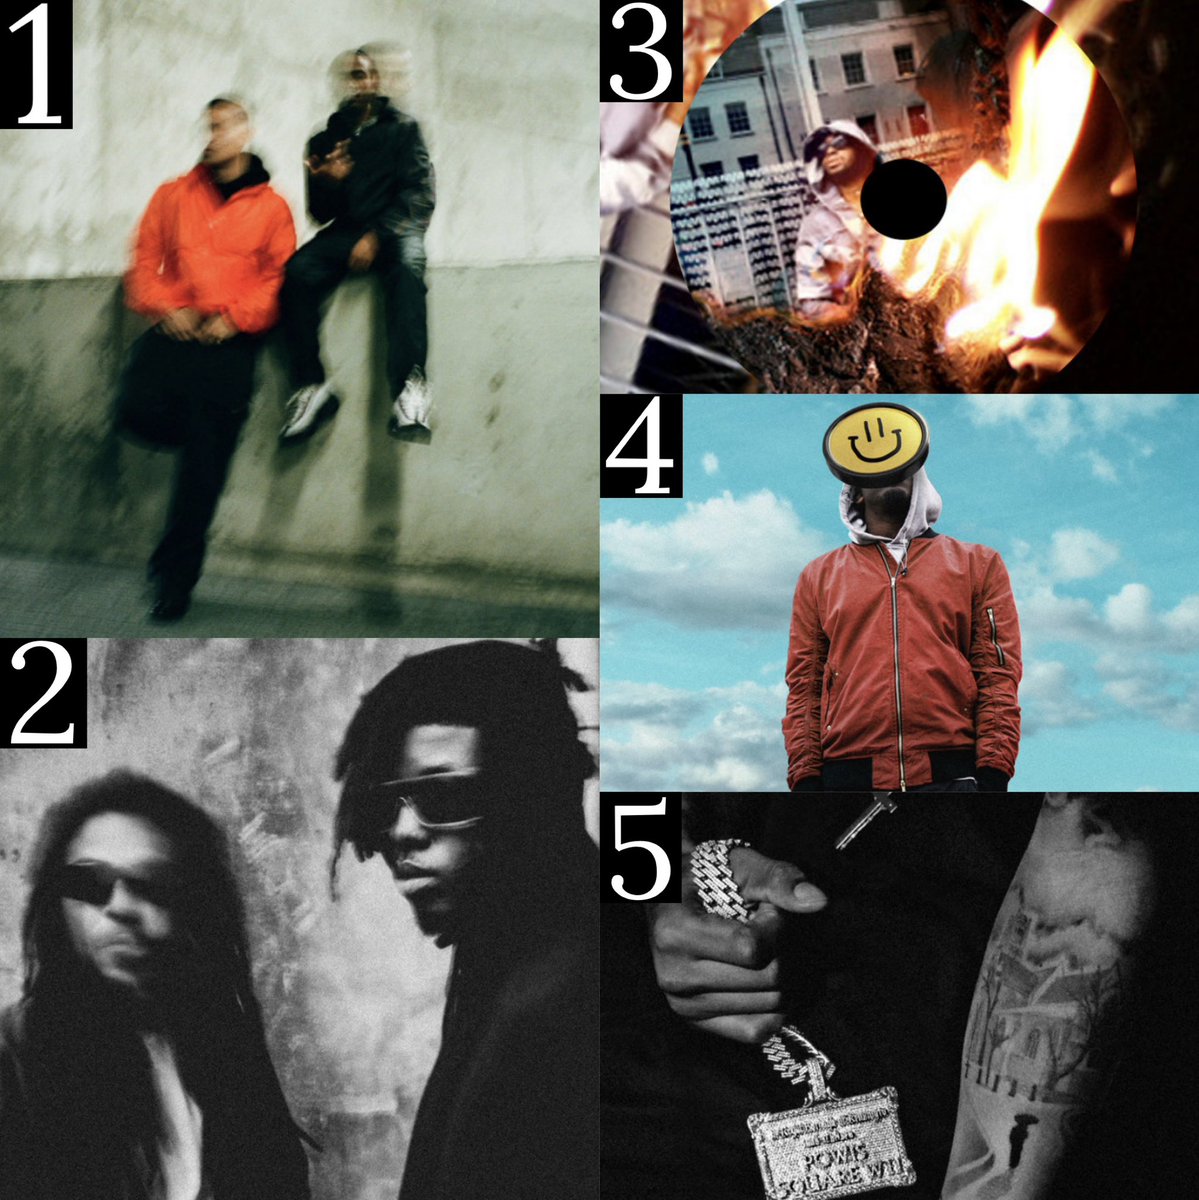 NEW MUSIC FRIDAY
LISTEN AGAIN TOP 5💣

1. Ashbeck, Rushy: ROYALE
2. NARX, Liam Bailey: We’re Not Clear
3. Lorenzorsv: Burnt
4. Derek Minor, Ty Brasel: Third Day
5. F*ck Drill: Digga D